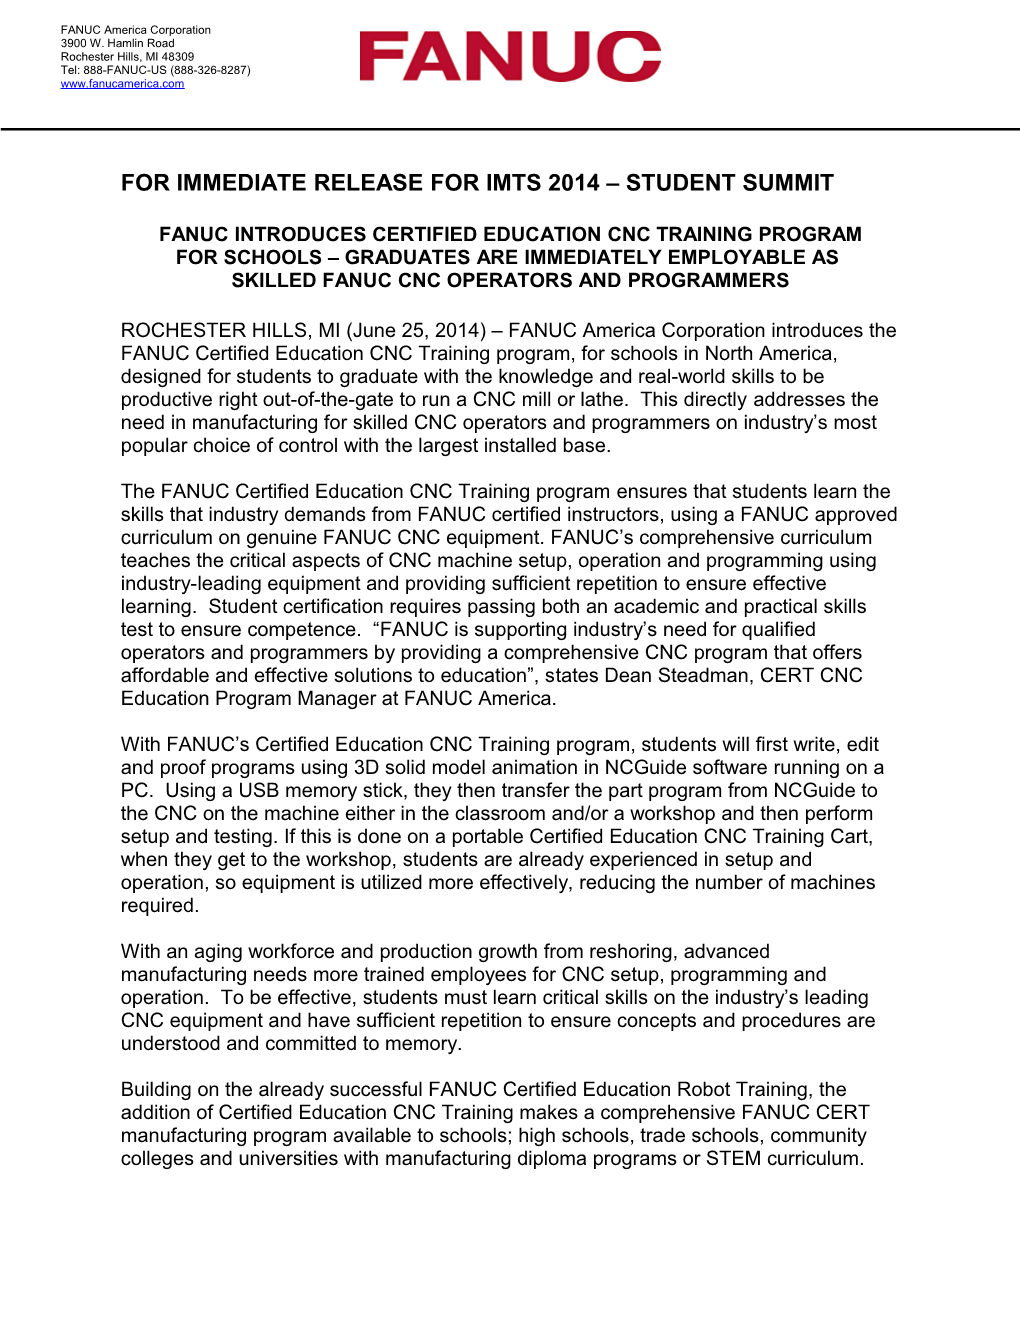 For Immediate Release for Imts 2014 Student Summit